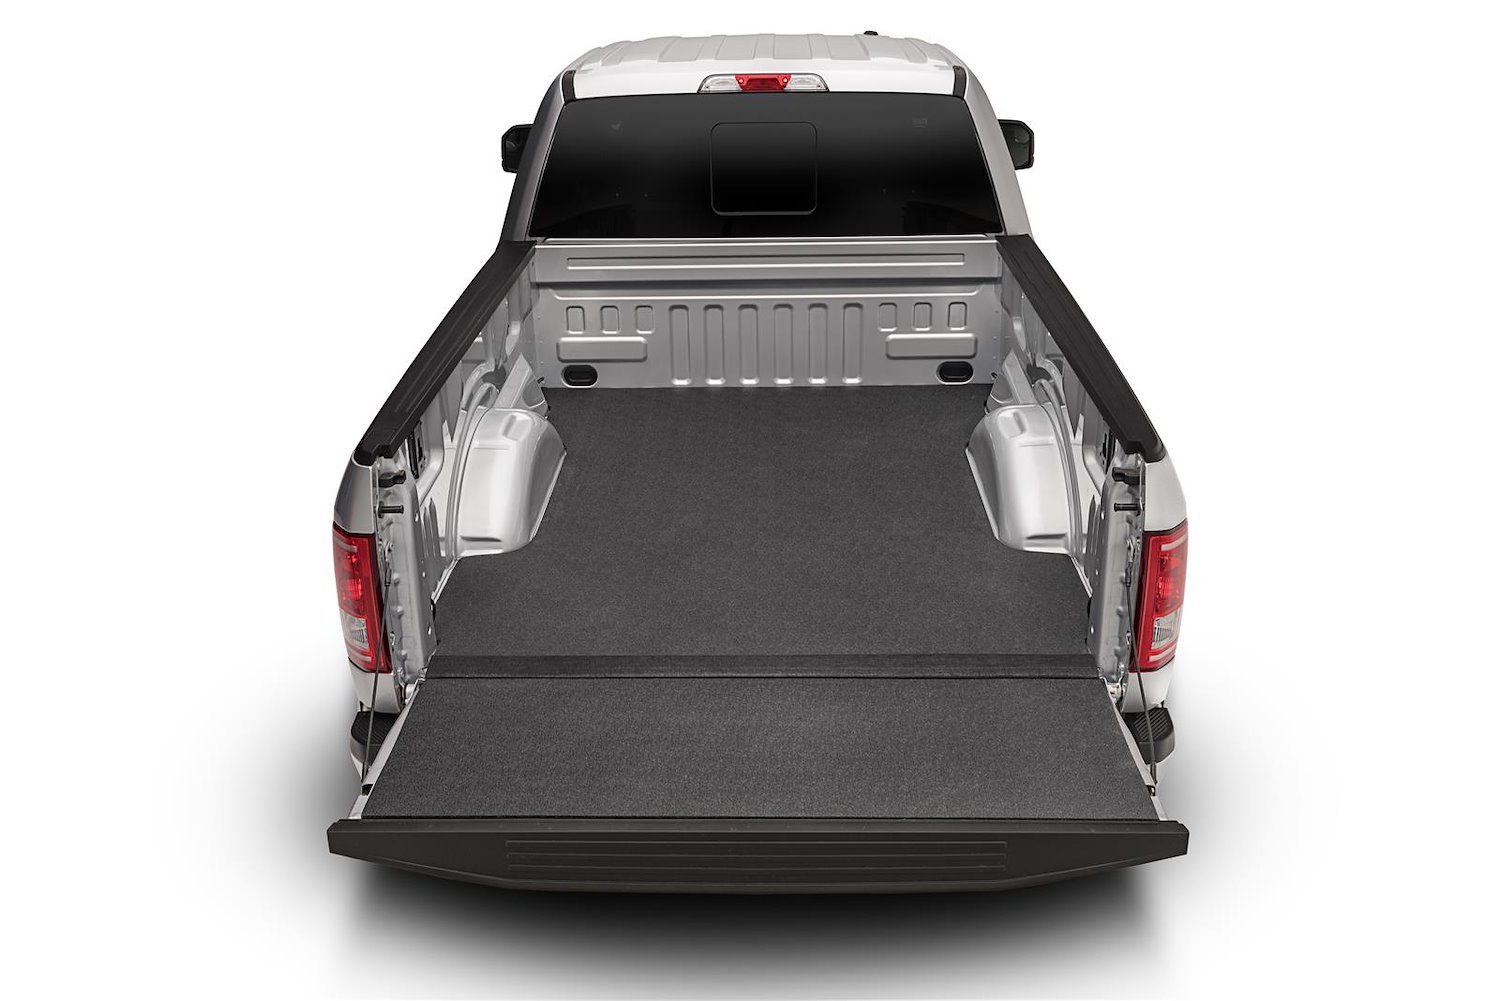 IMC07LBS IMPACT MAT FOR SPRAY-IN OR NO BED LINER 07-18 GM SILVERADO/SIERRA 8' BED